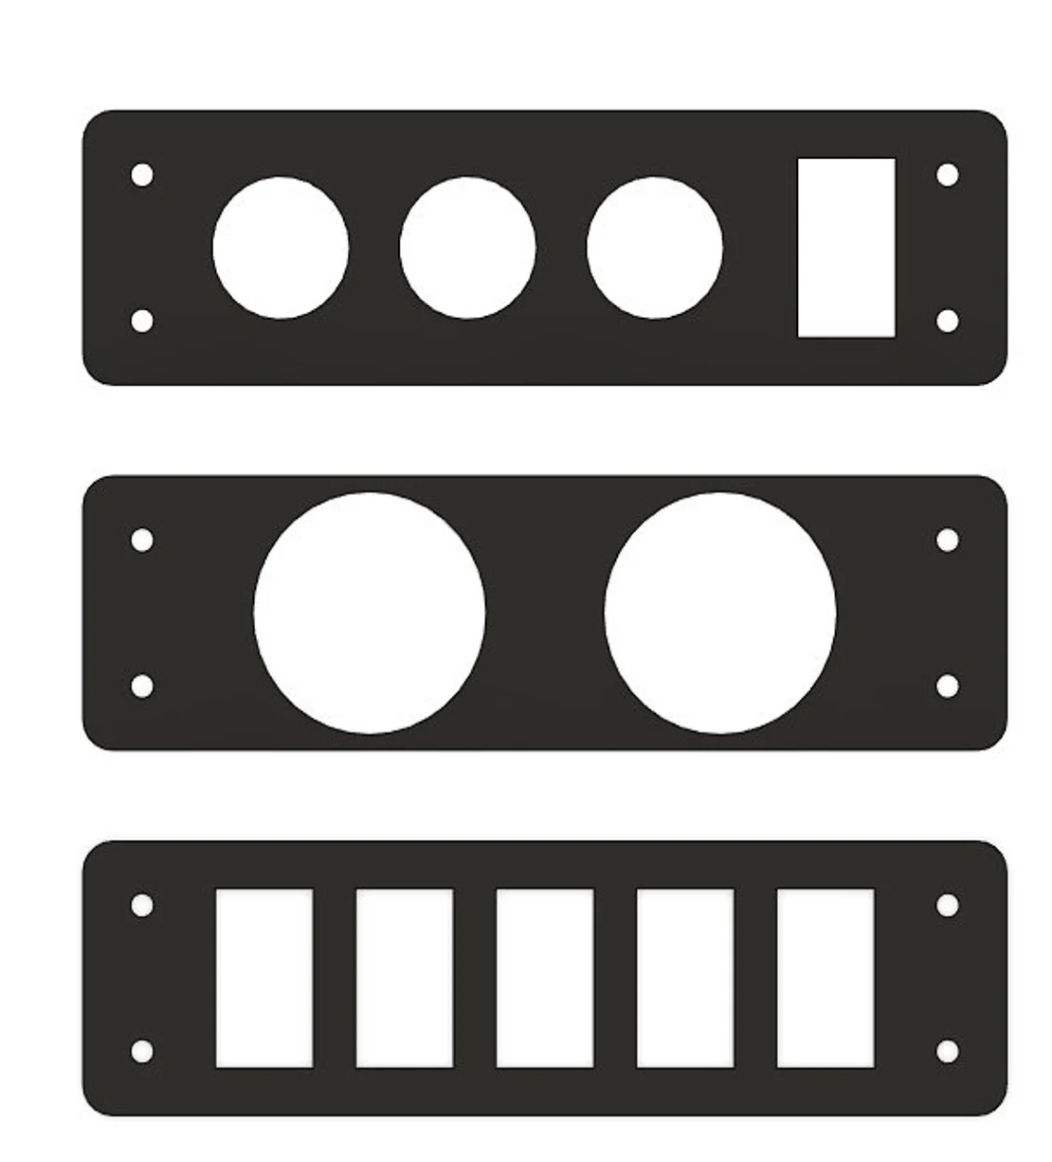 Face plate selection